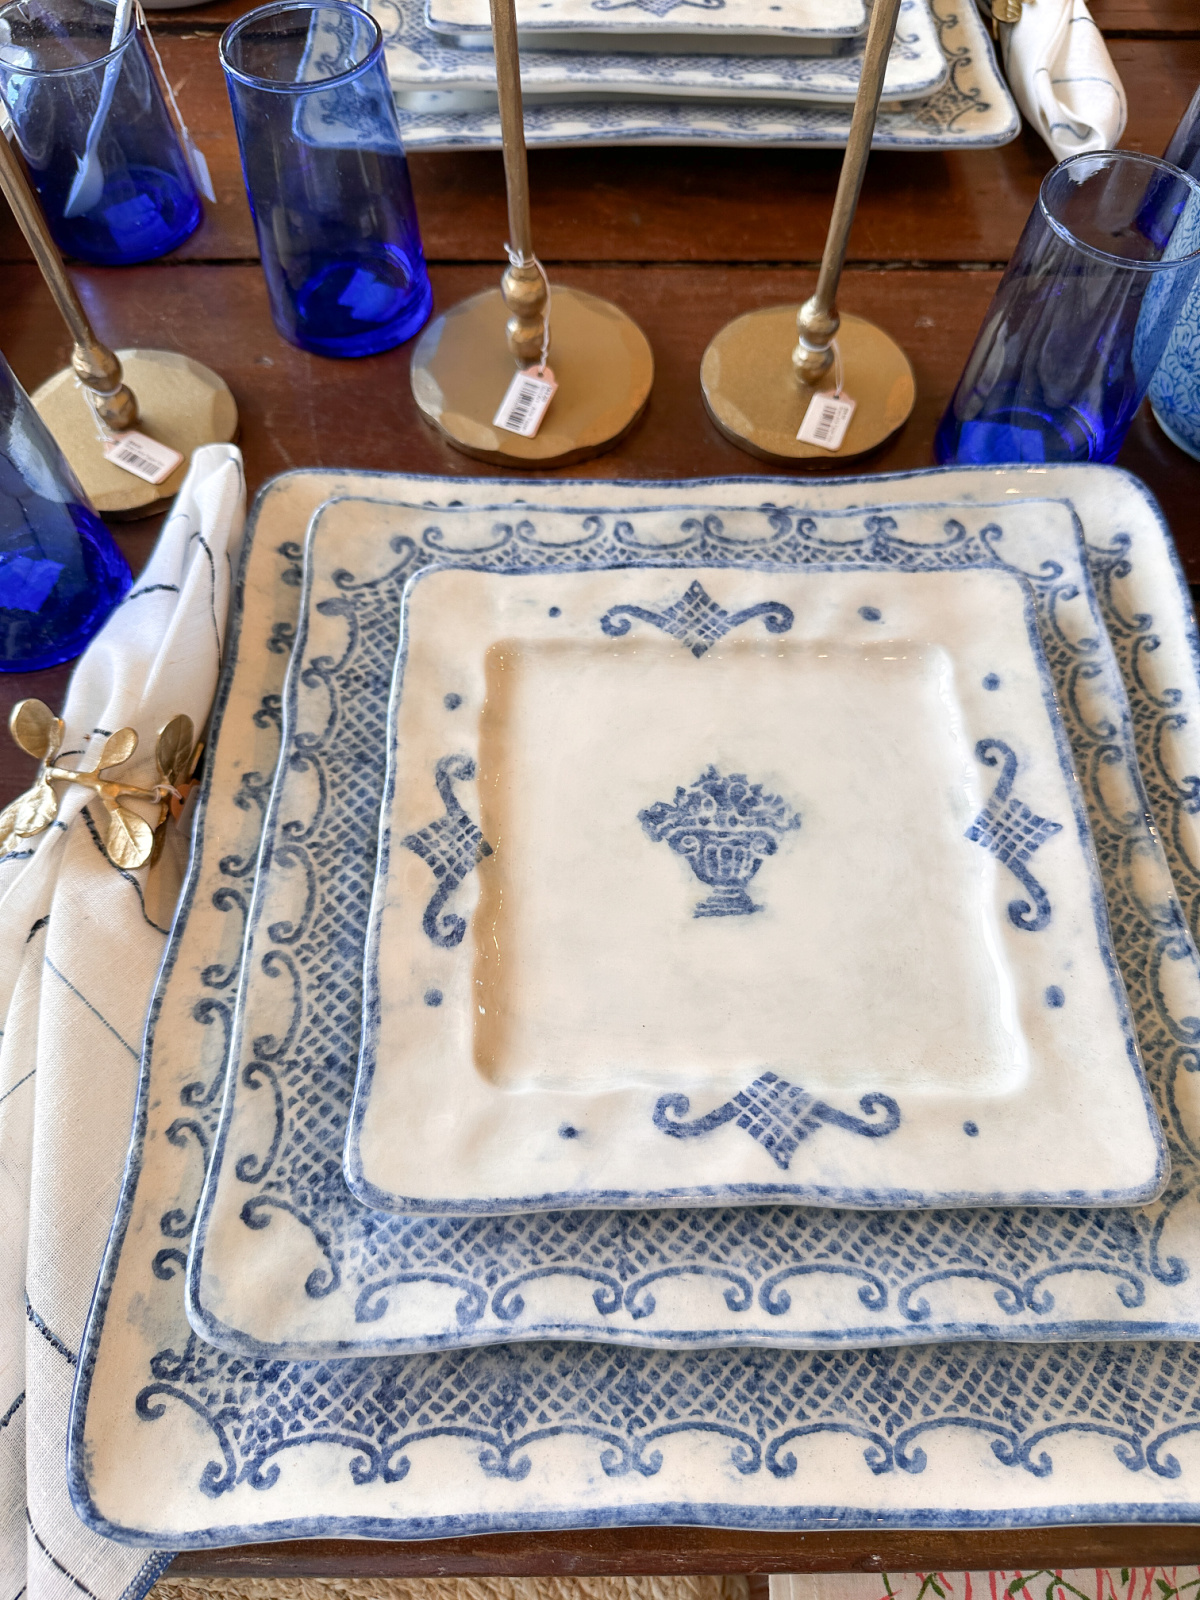 Square blue and white plates.